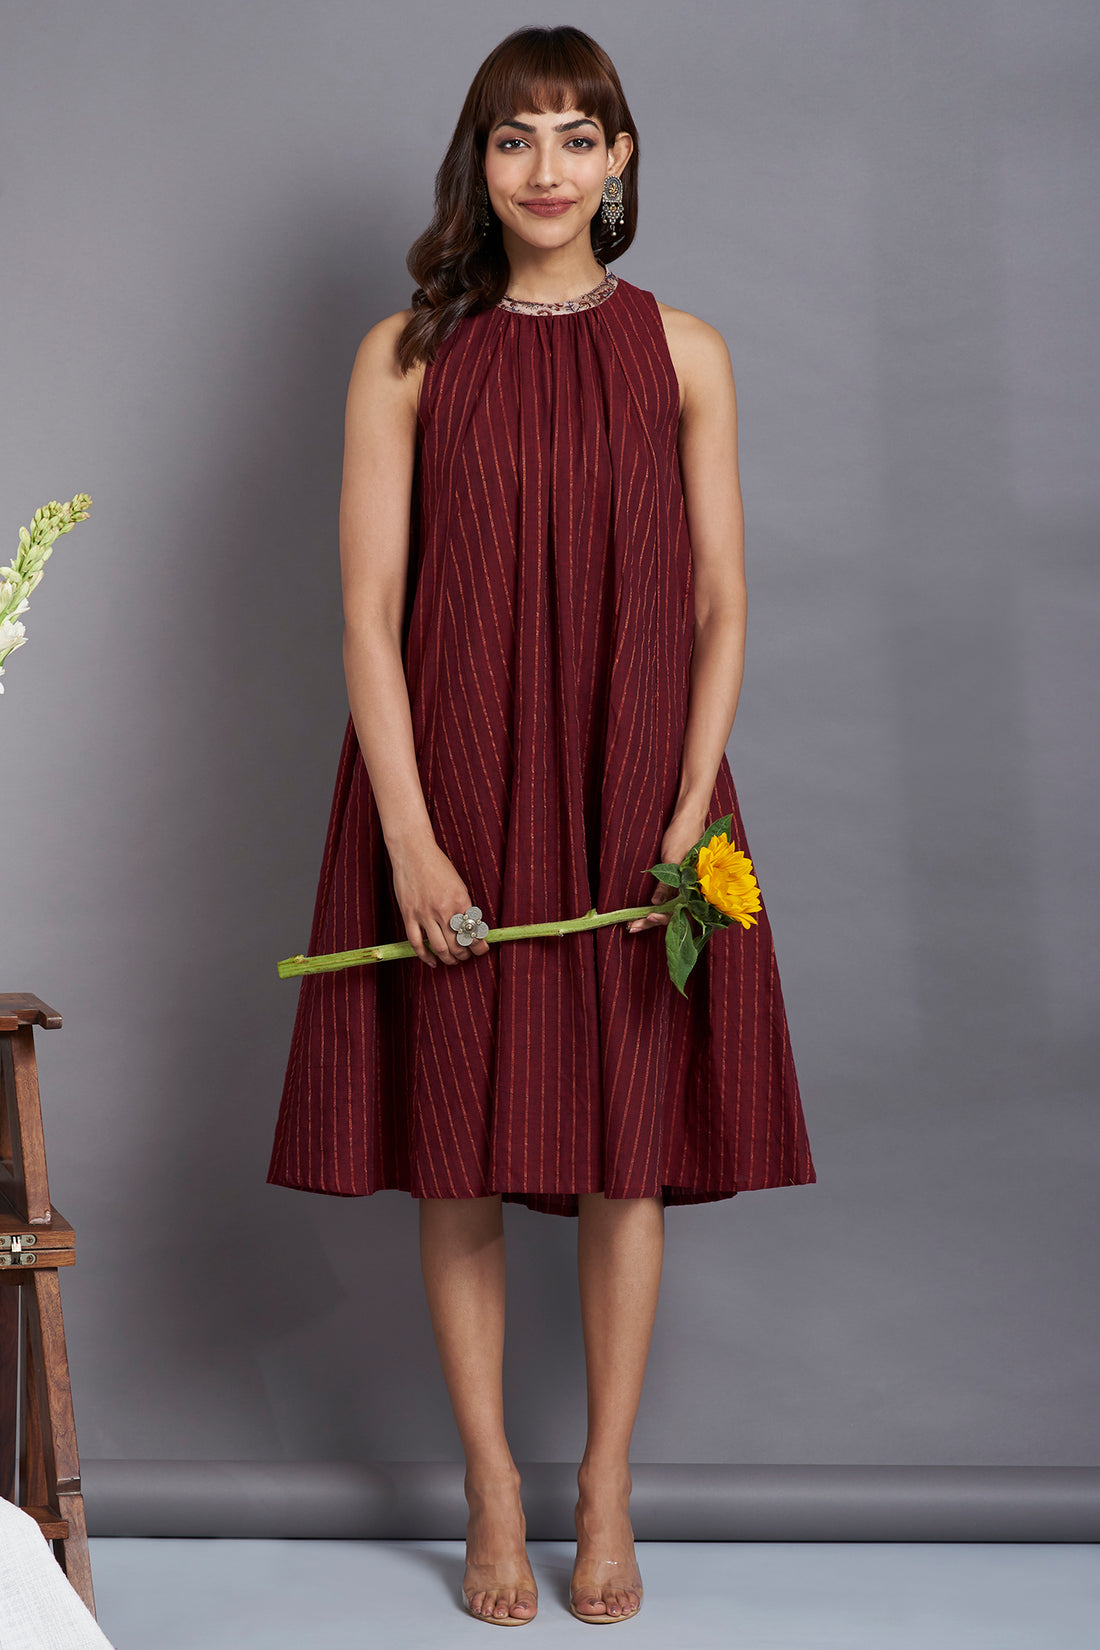 marsala valley - sleeveless crew neck gather dress with gold lines